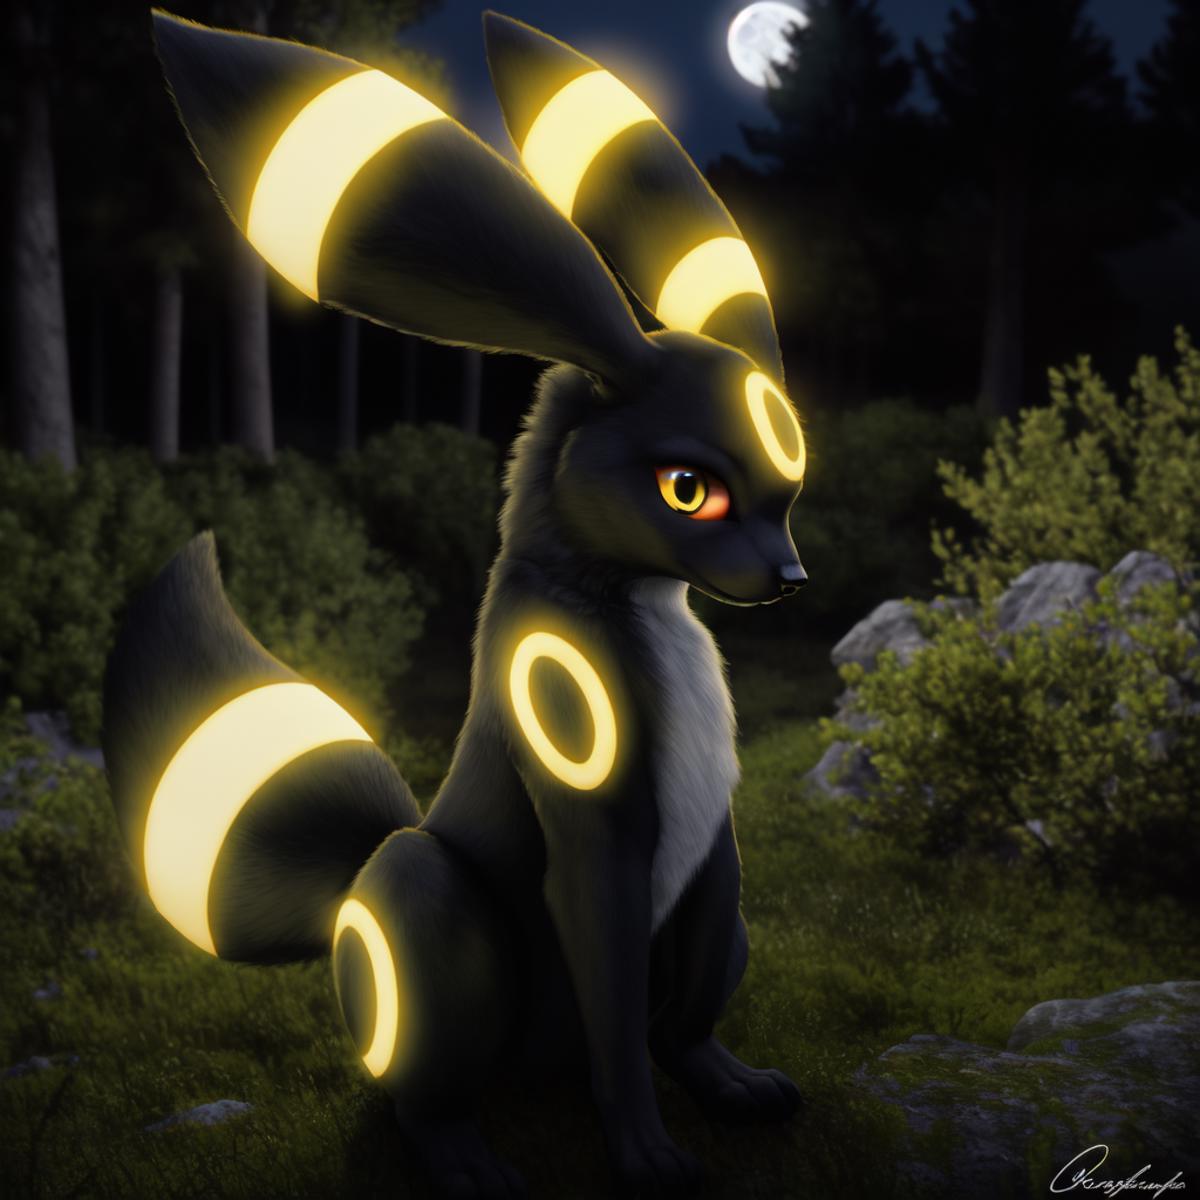 Umbreon - Pokemon | Pocket monsters image by Taintedcoil2